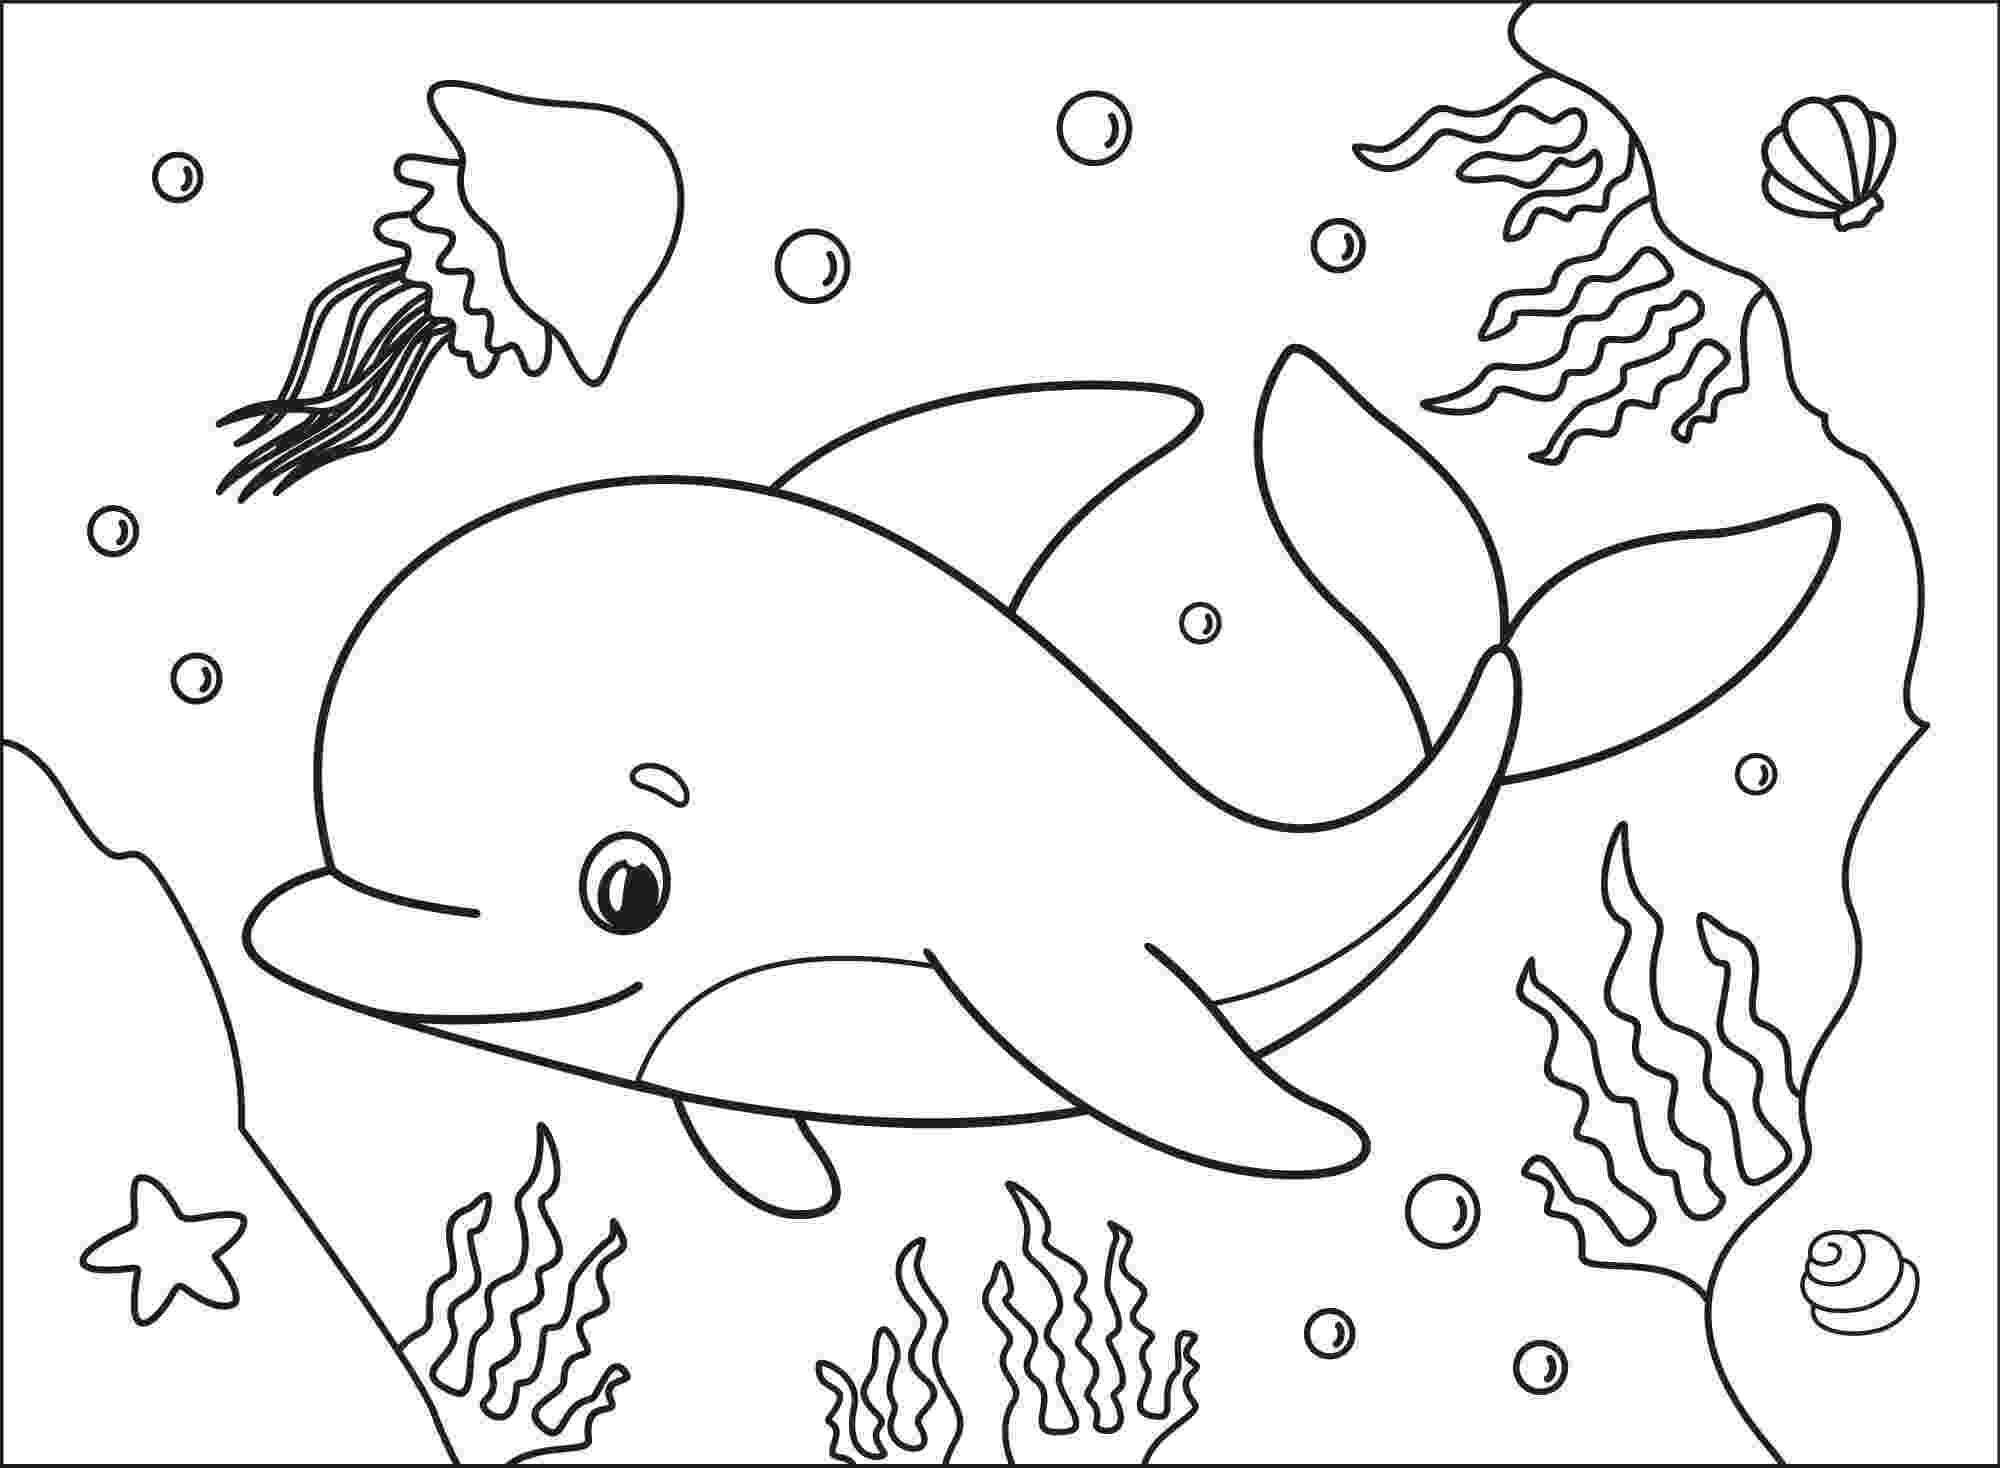 Cute dolphin with jellyfish and scallops Coloring Page